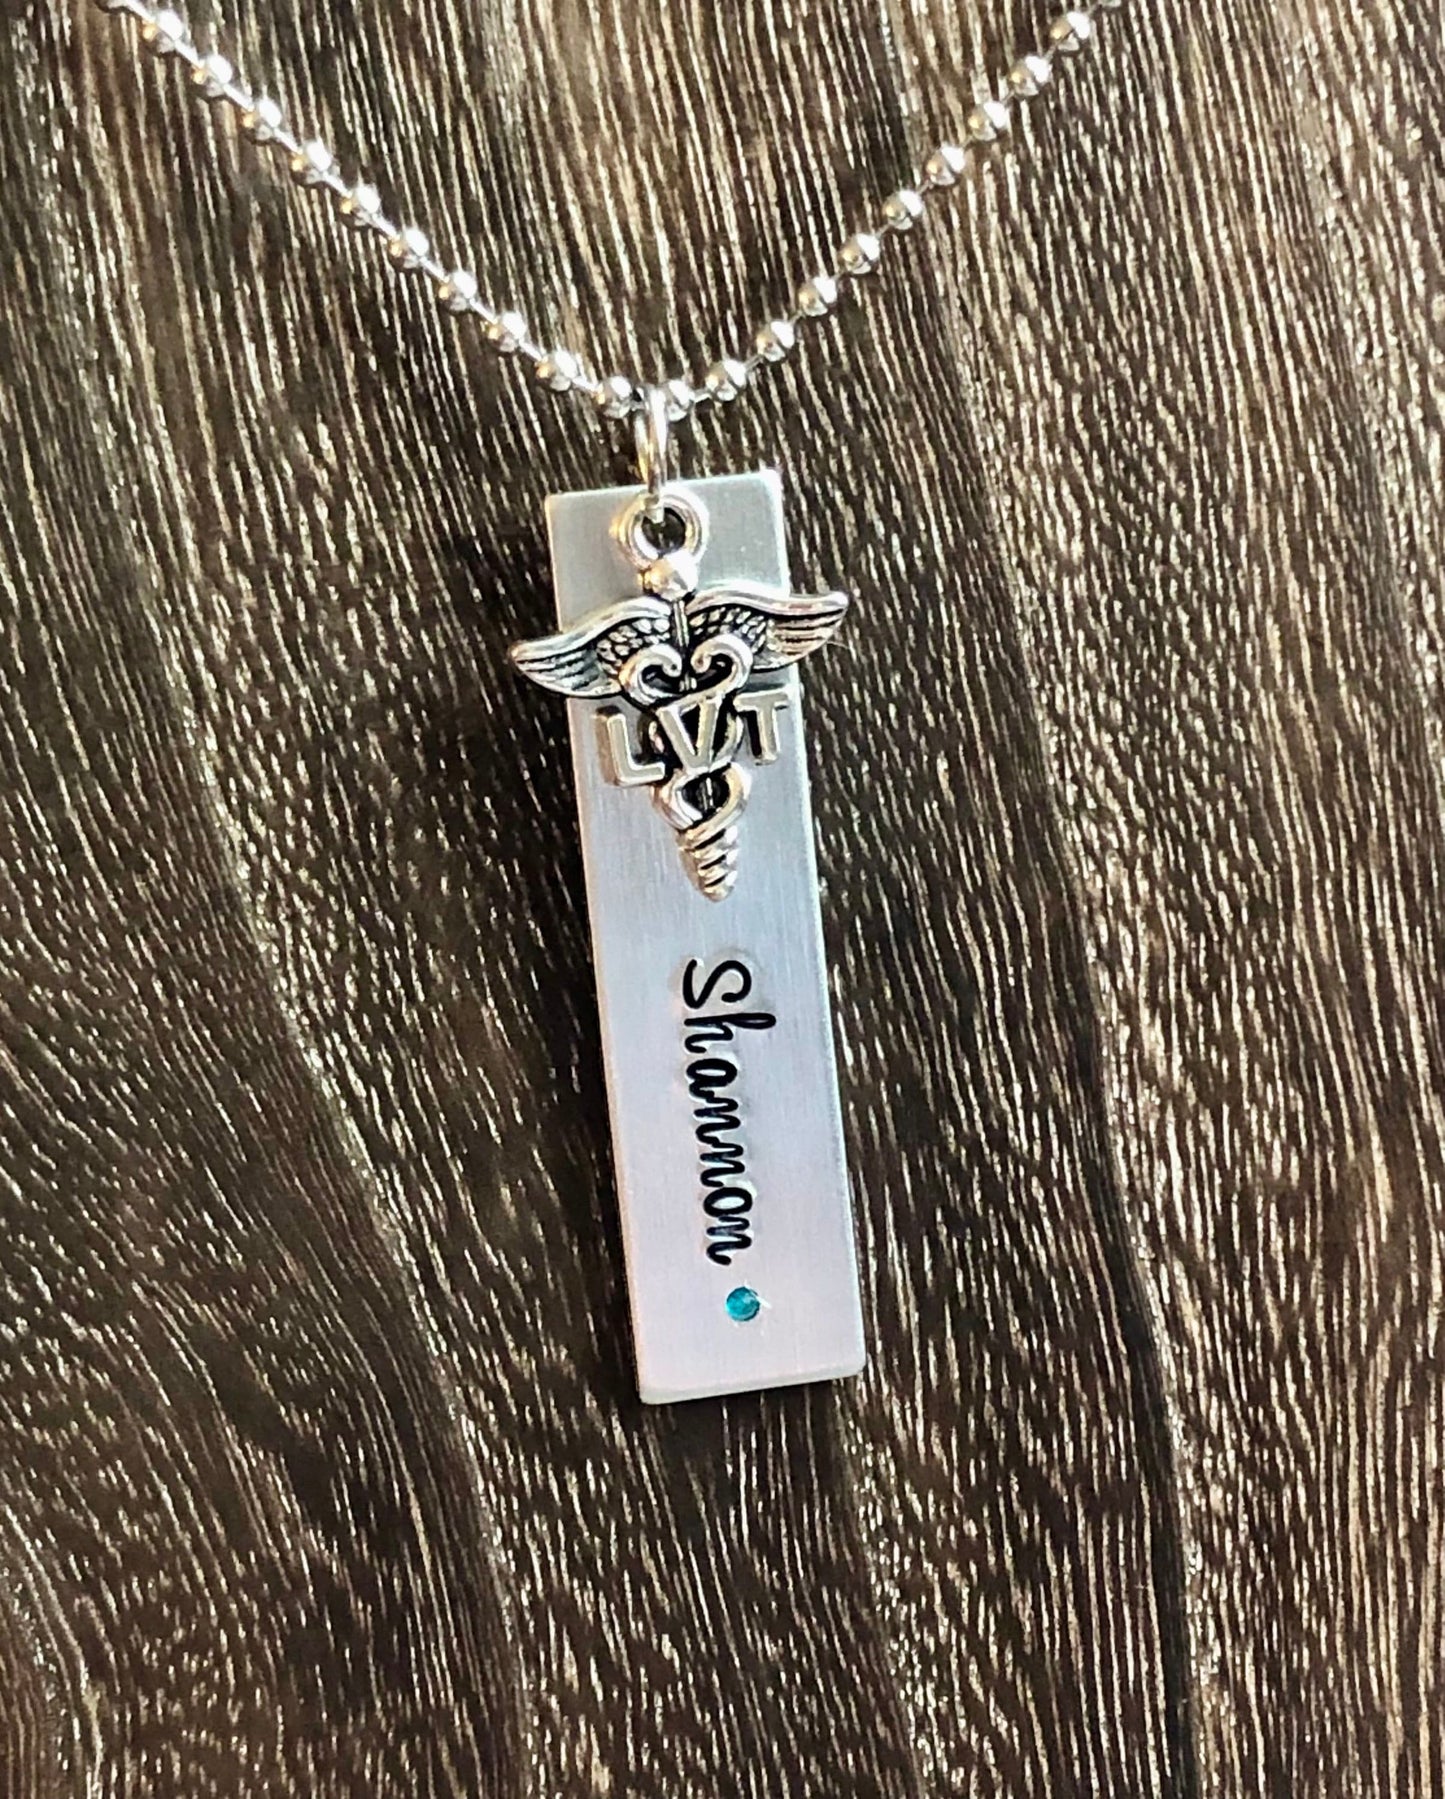 CVT Necklace, Vet Tech Graduation, Certified Veterinary Technician Necklace with Inset Birthstone and Name, Gift for Vet Tech, Licensed